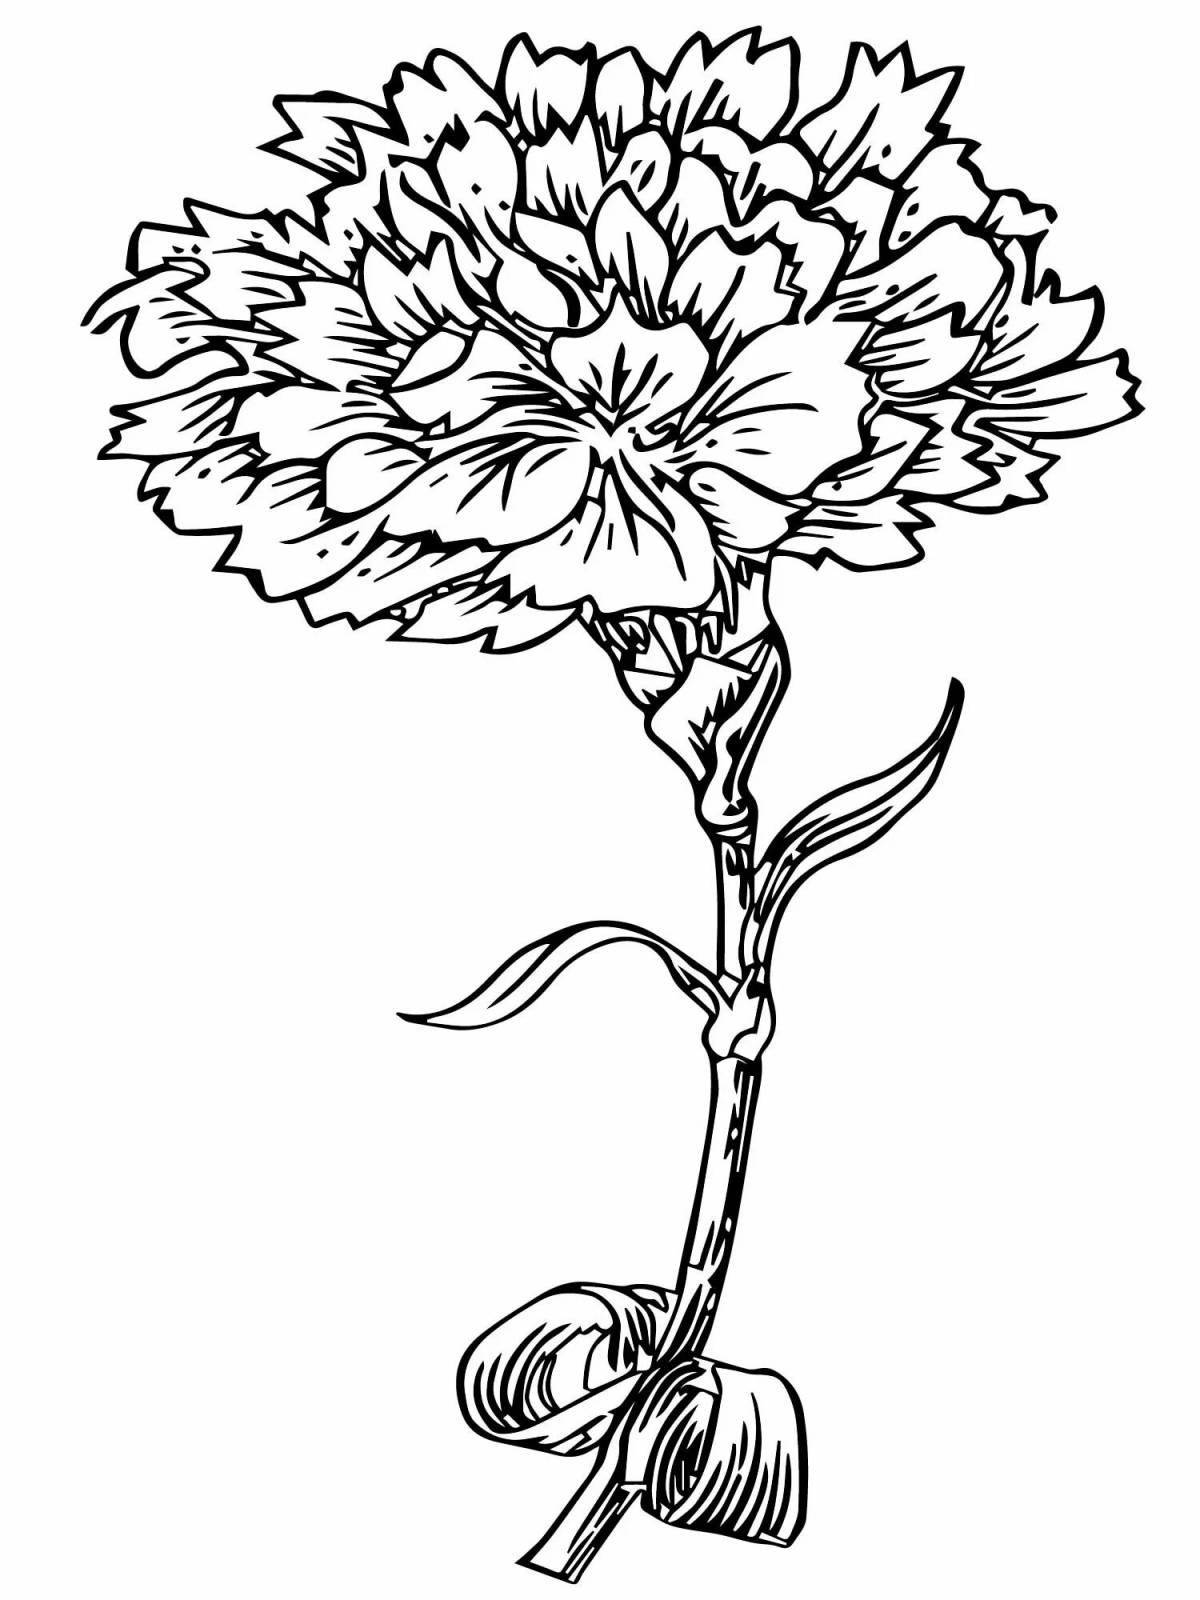 Adorable carnation coloring book for kids